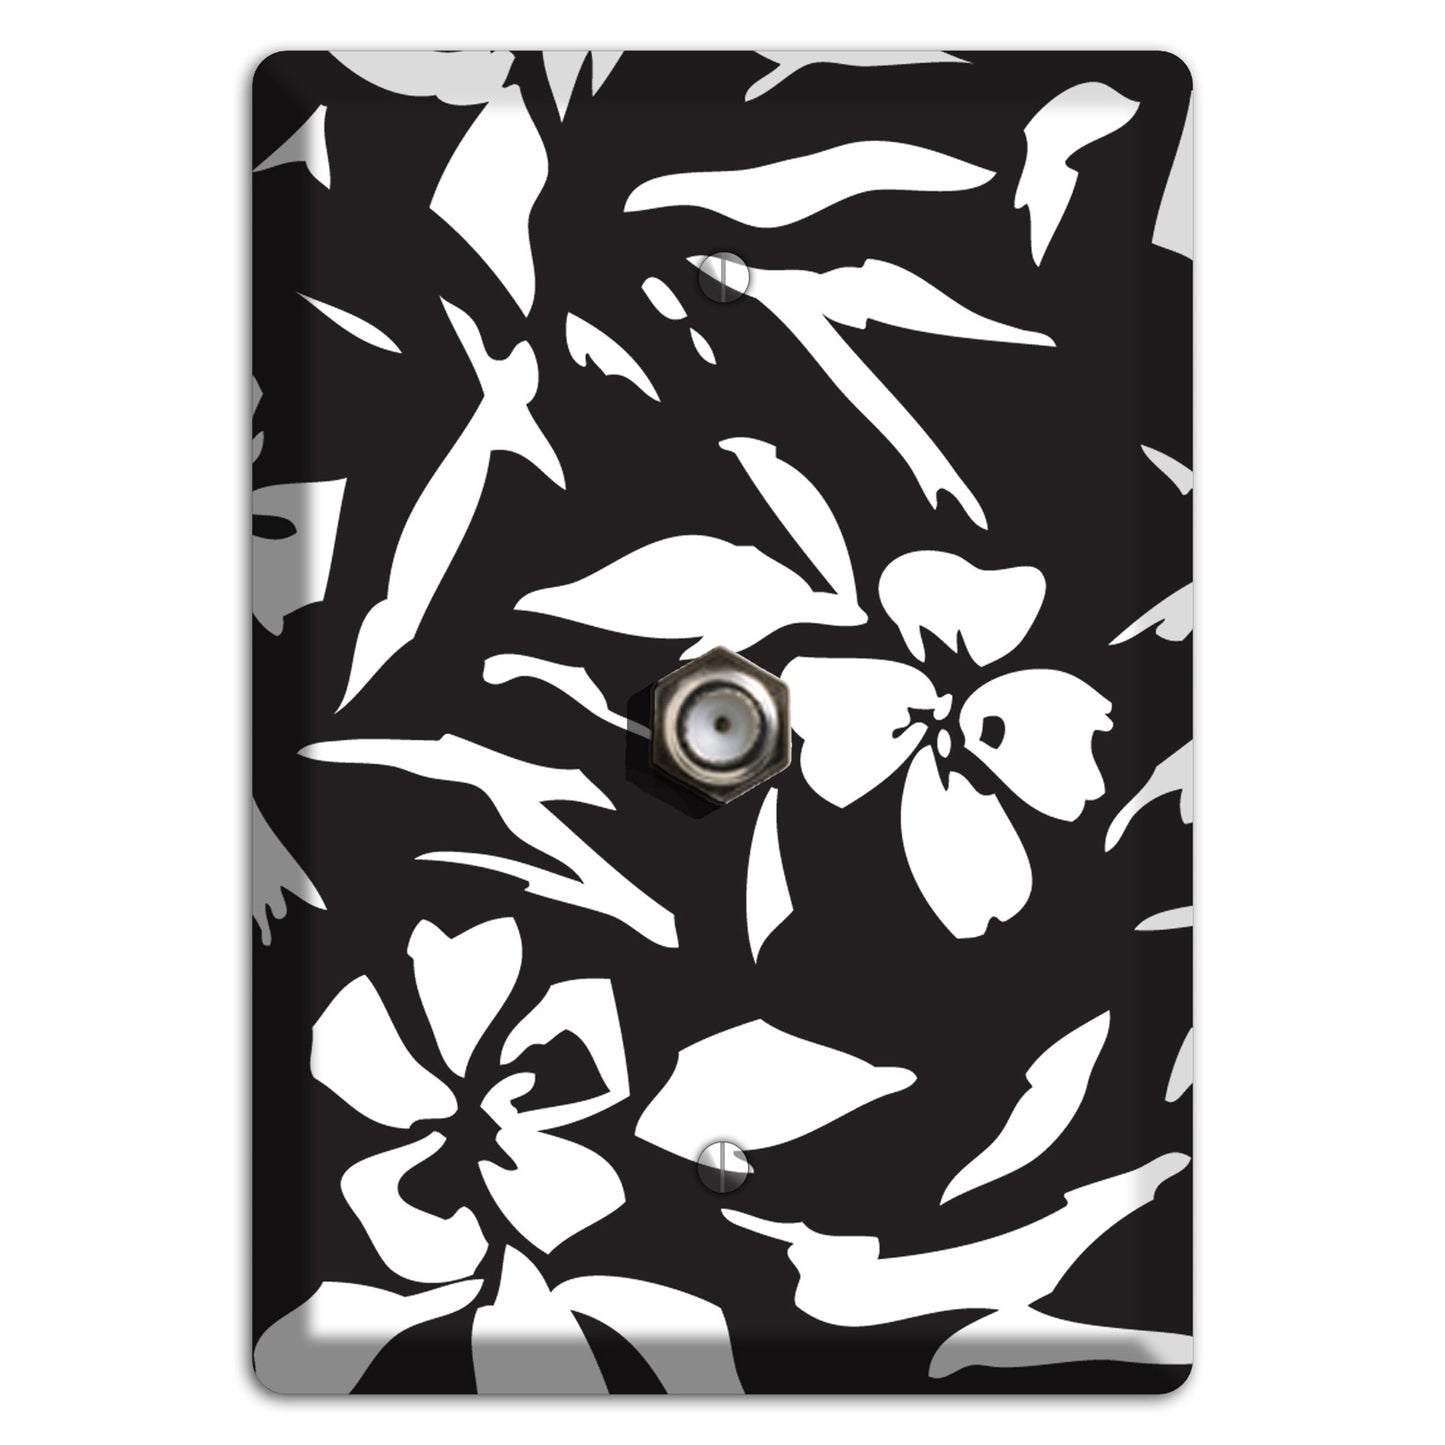 Black with White Woodcut Floral Cable Wallplate